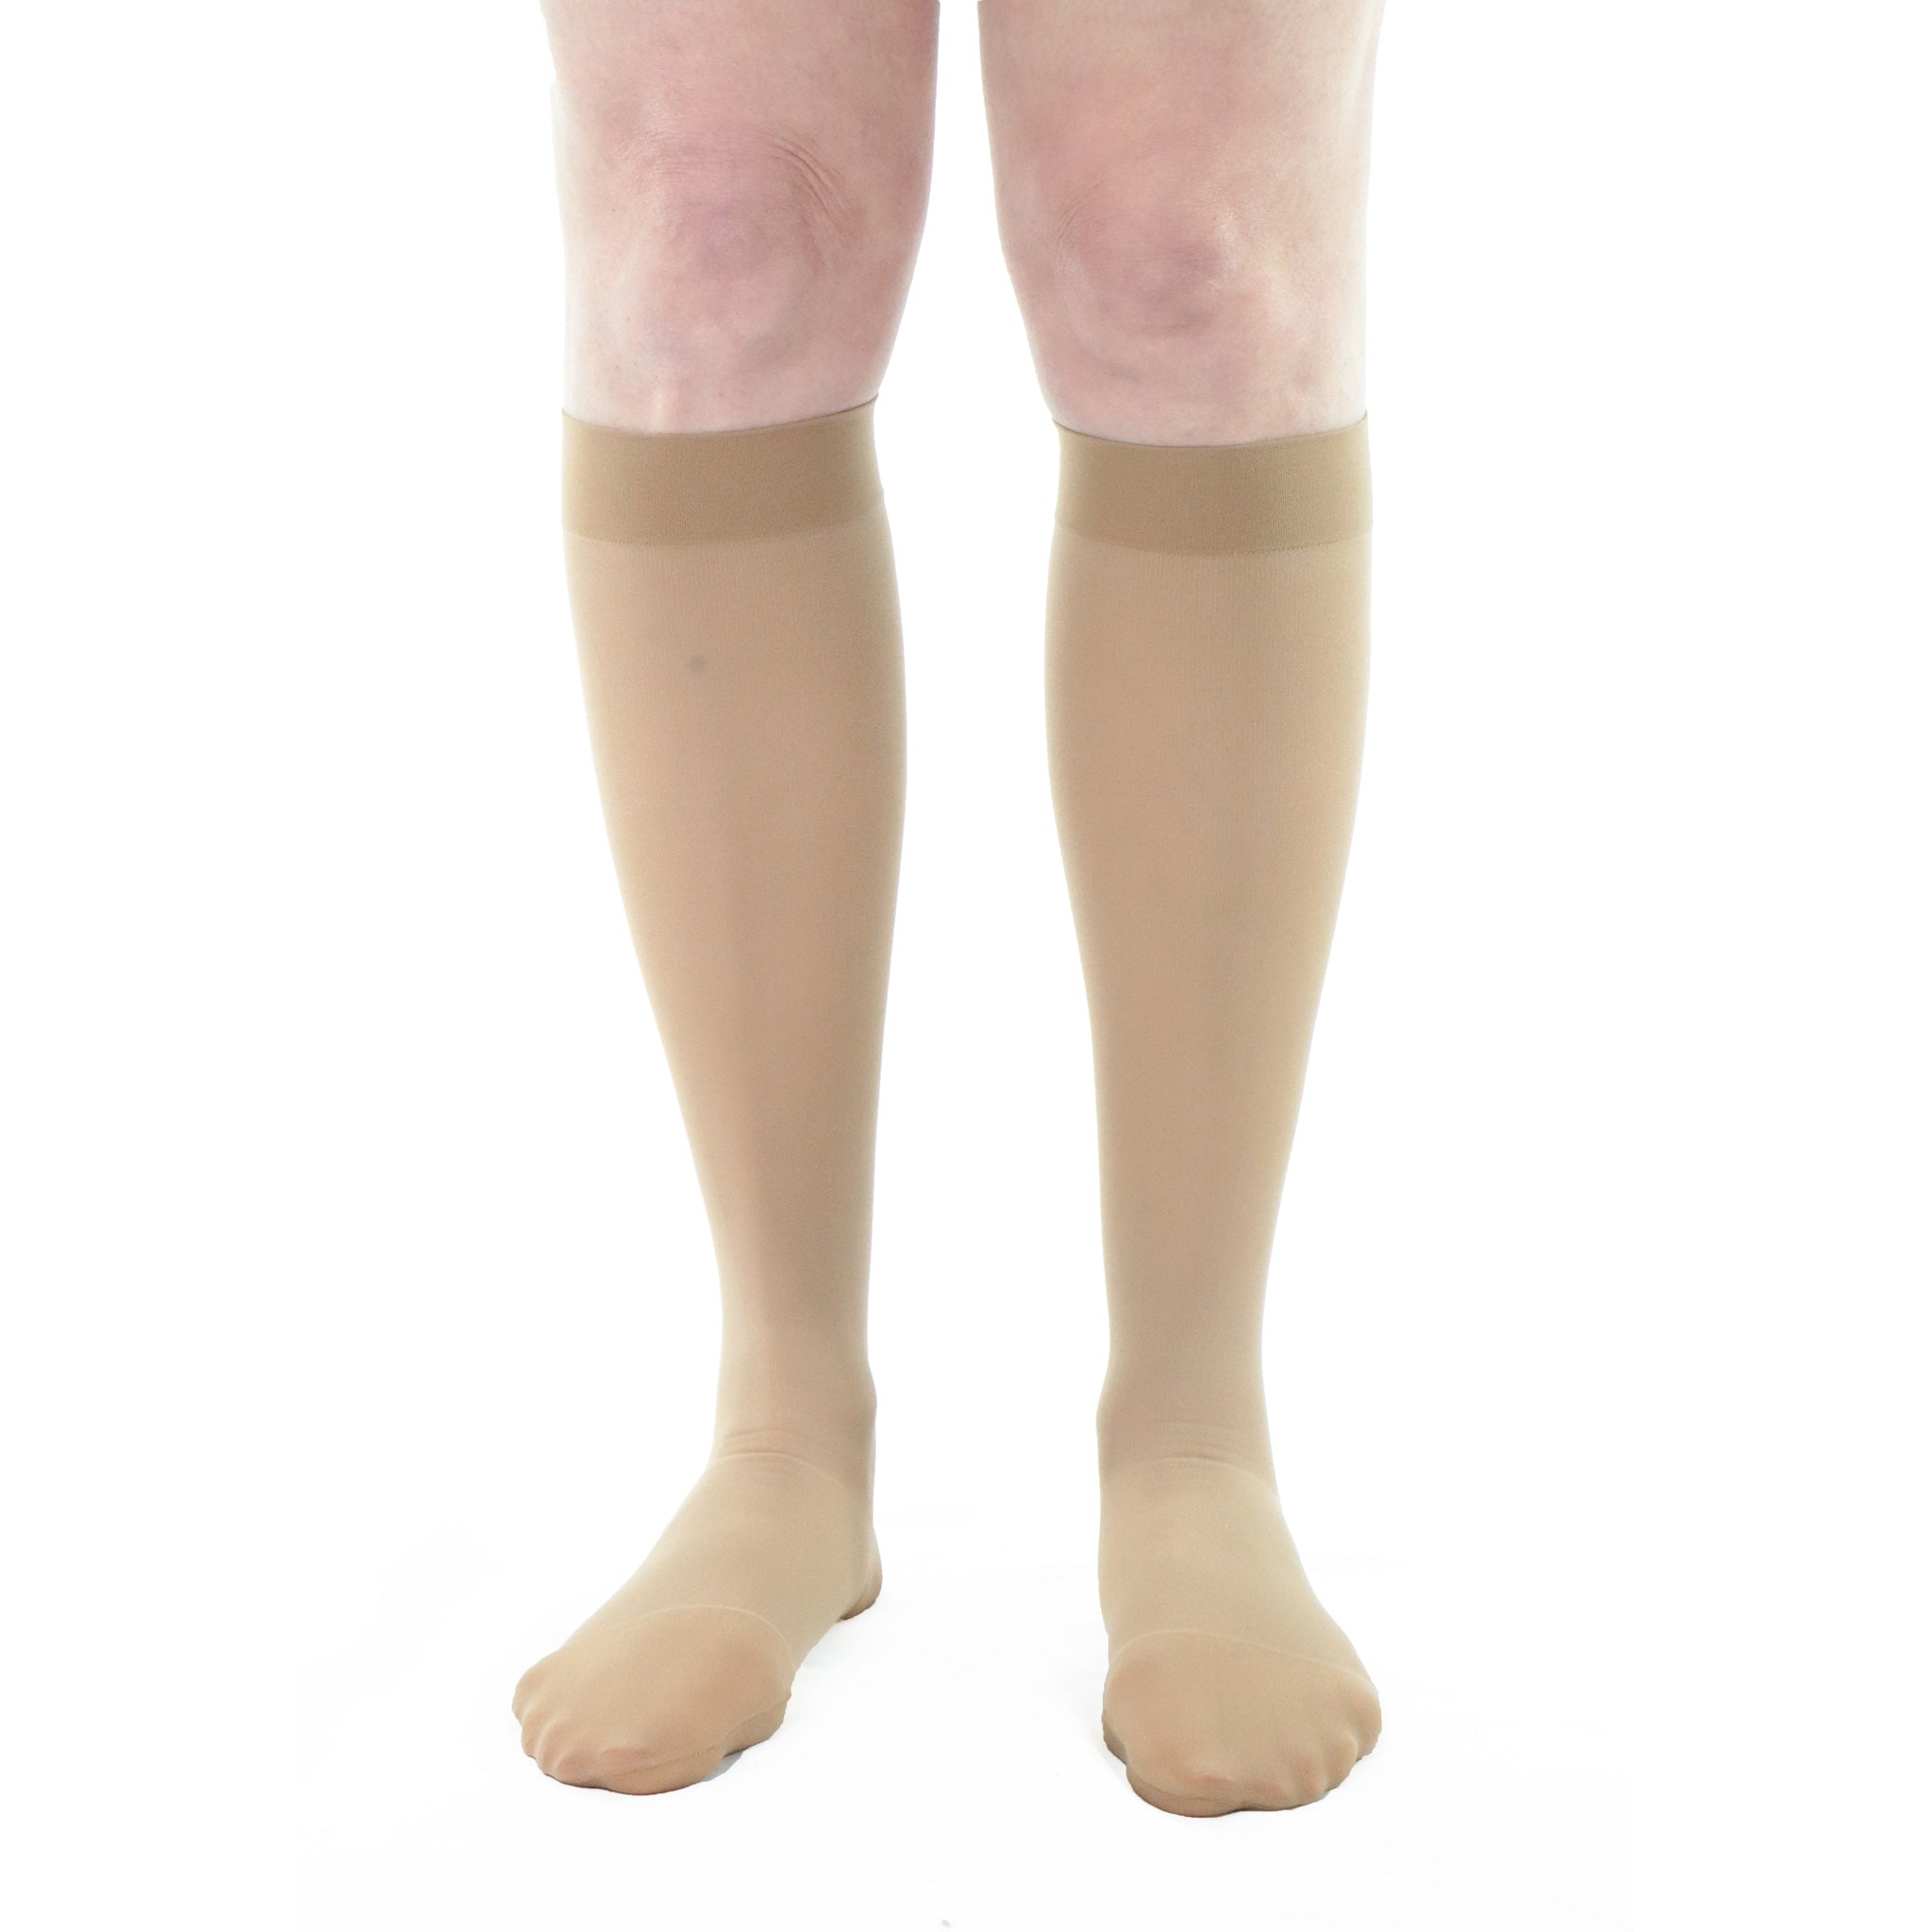 Doctor Brace compression stockings for women 30-40 mmHg beige in closed toe front view